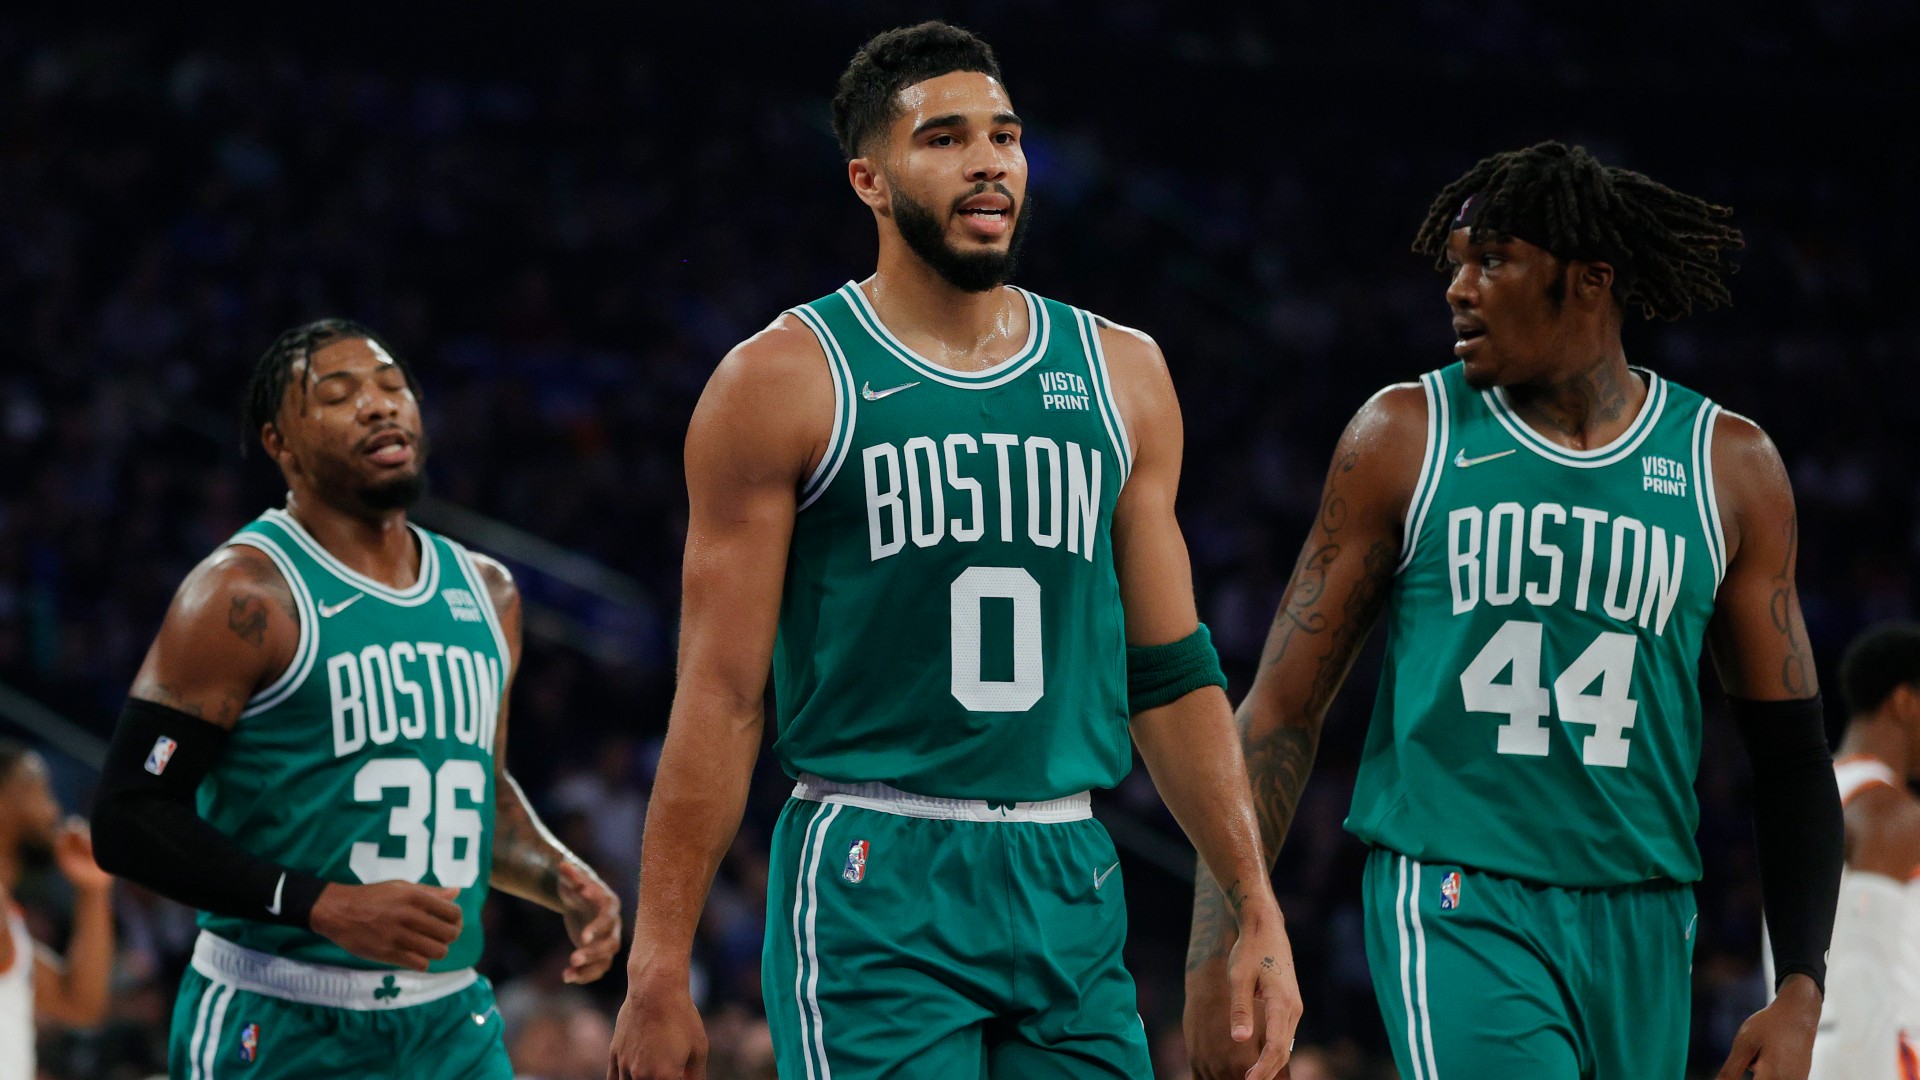 marcus smart called out jayson tatum and jaylen brown after boston collapsed to the chicago